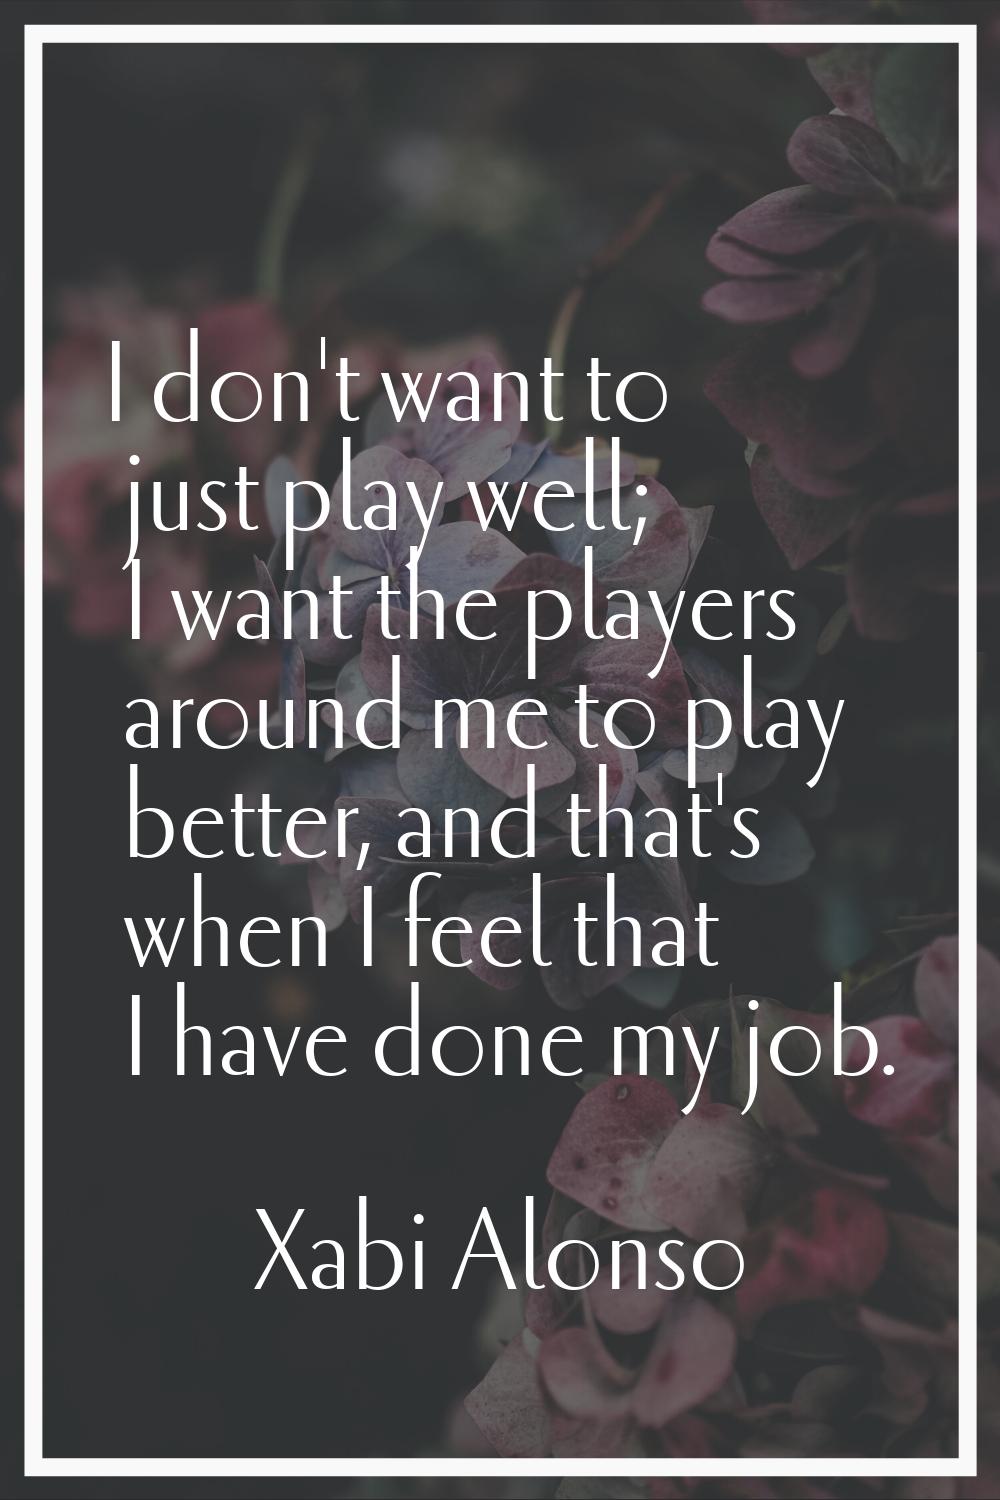 I don't want to just play well; I want the players around me to play better, and that's when I feel